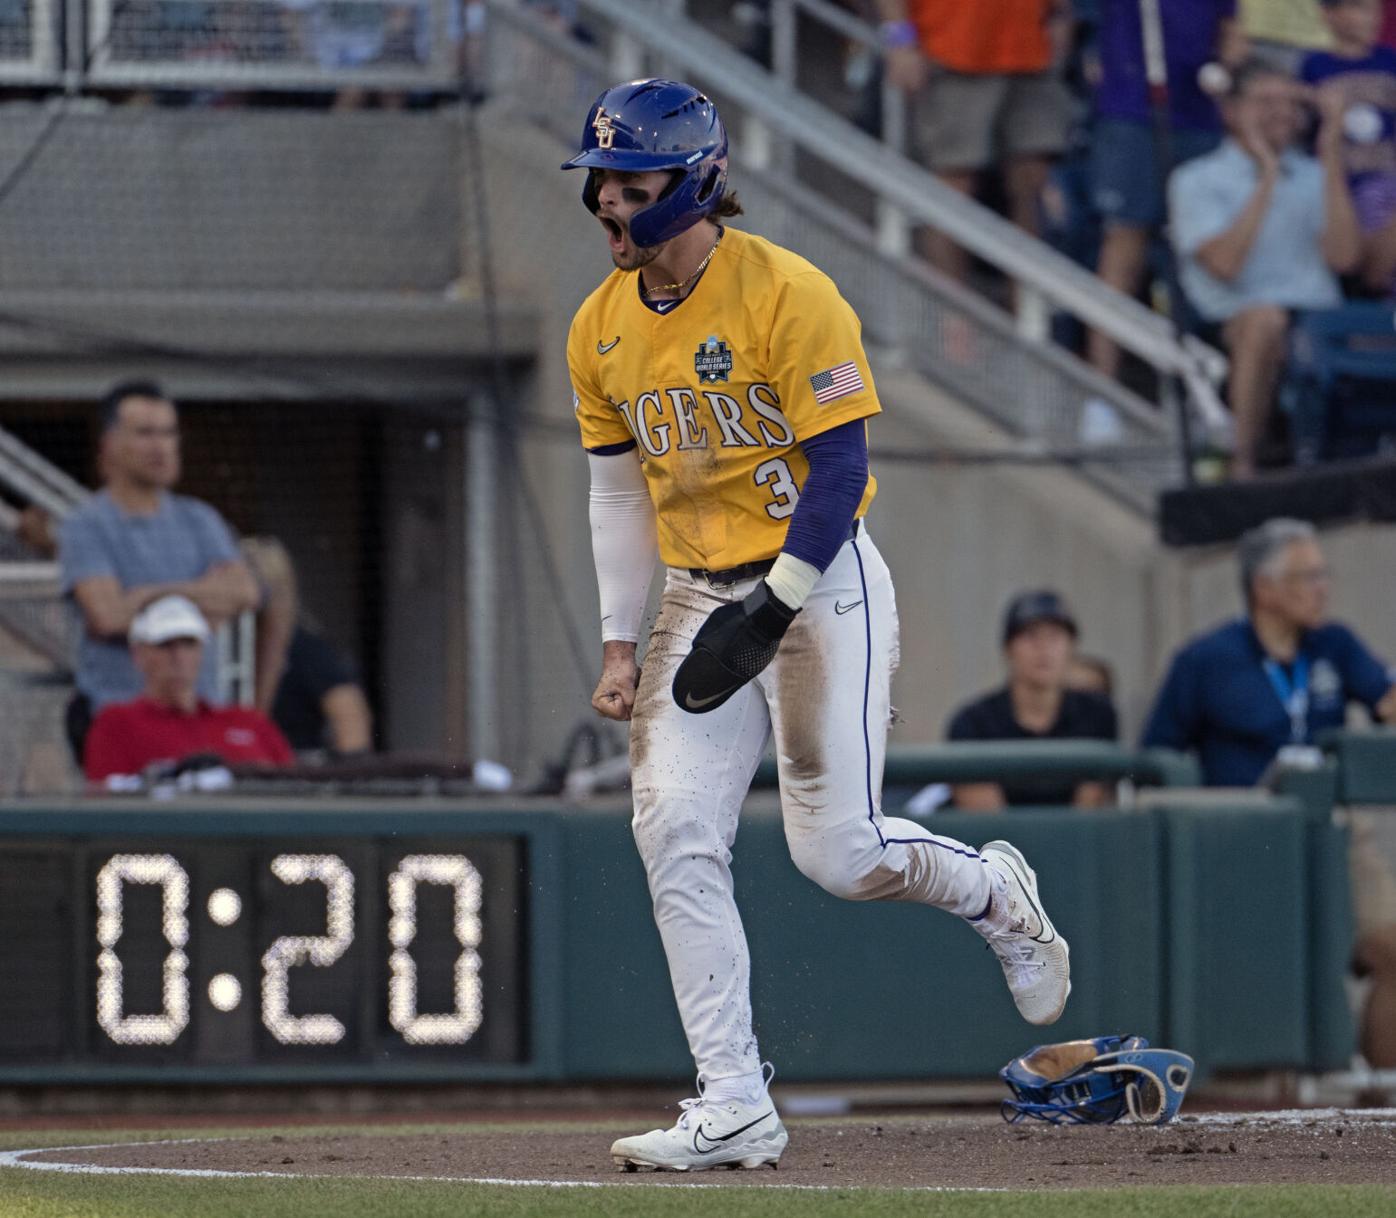 Photos: Belly Bomb in the 11th gives LSU 1-0 lead over Florida in